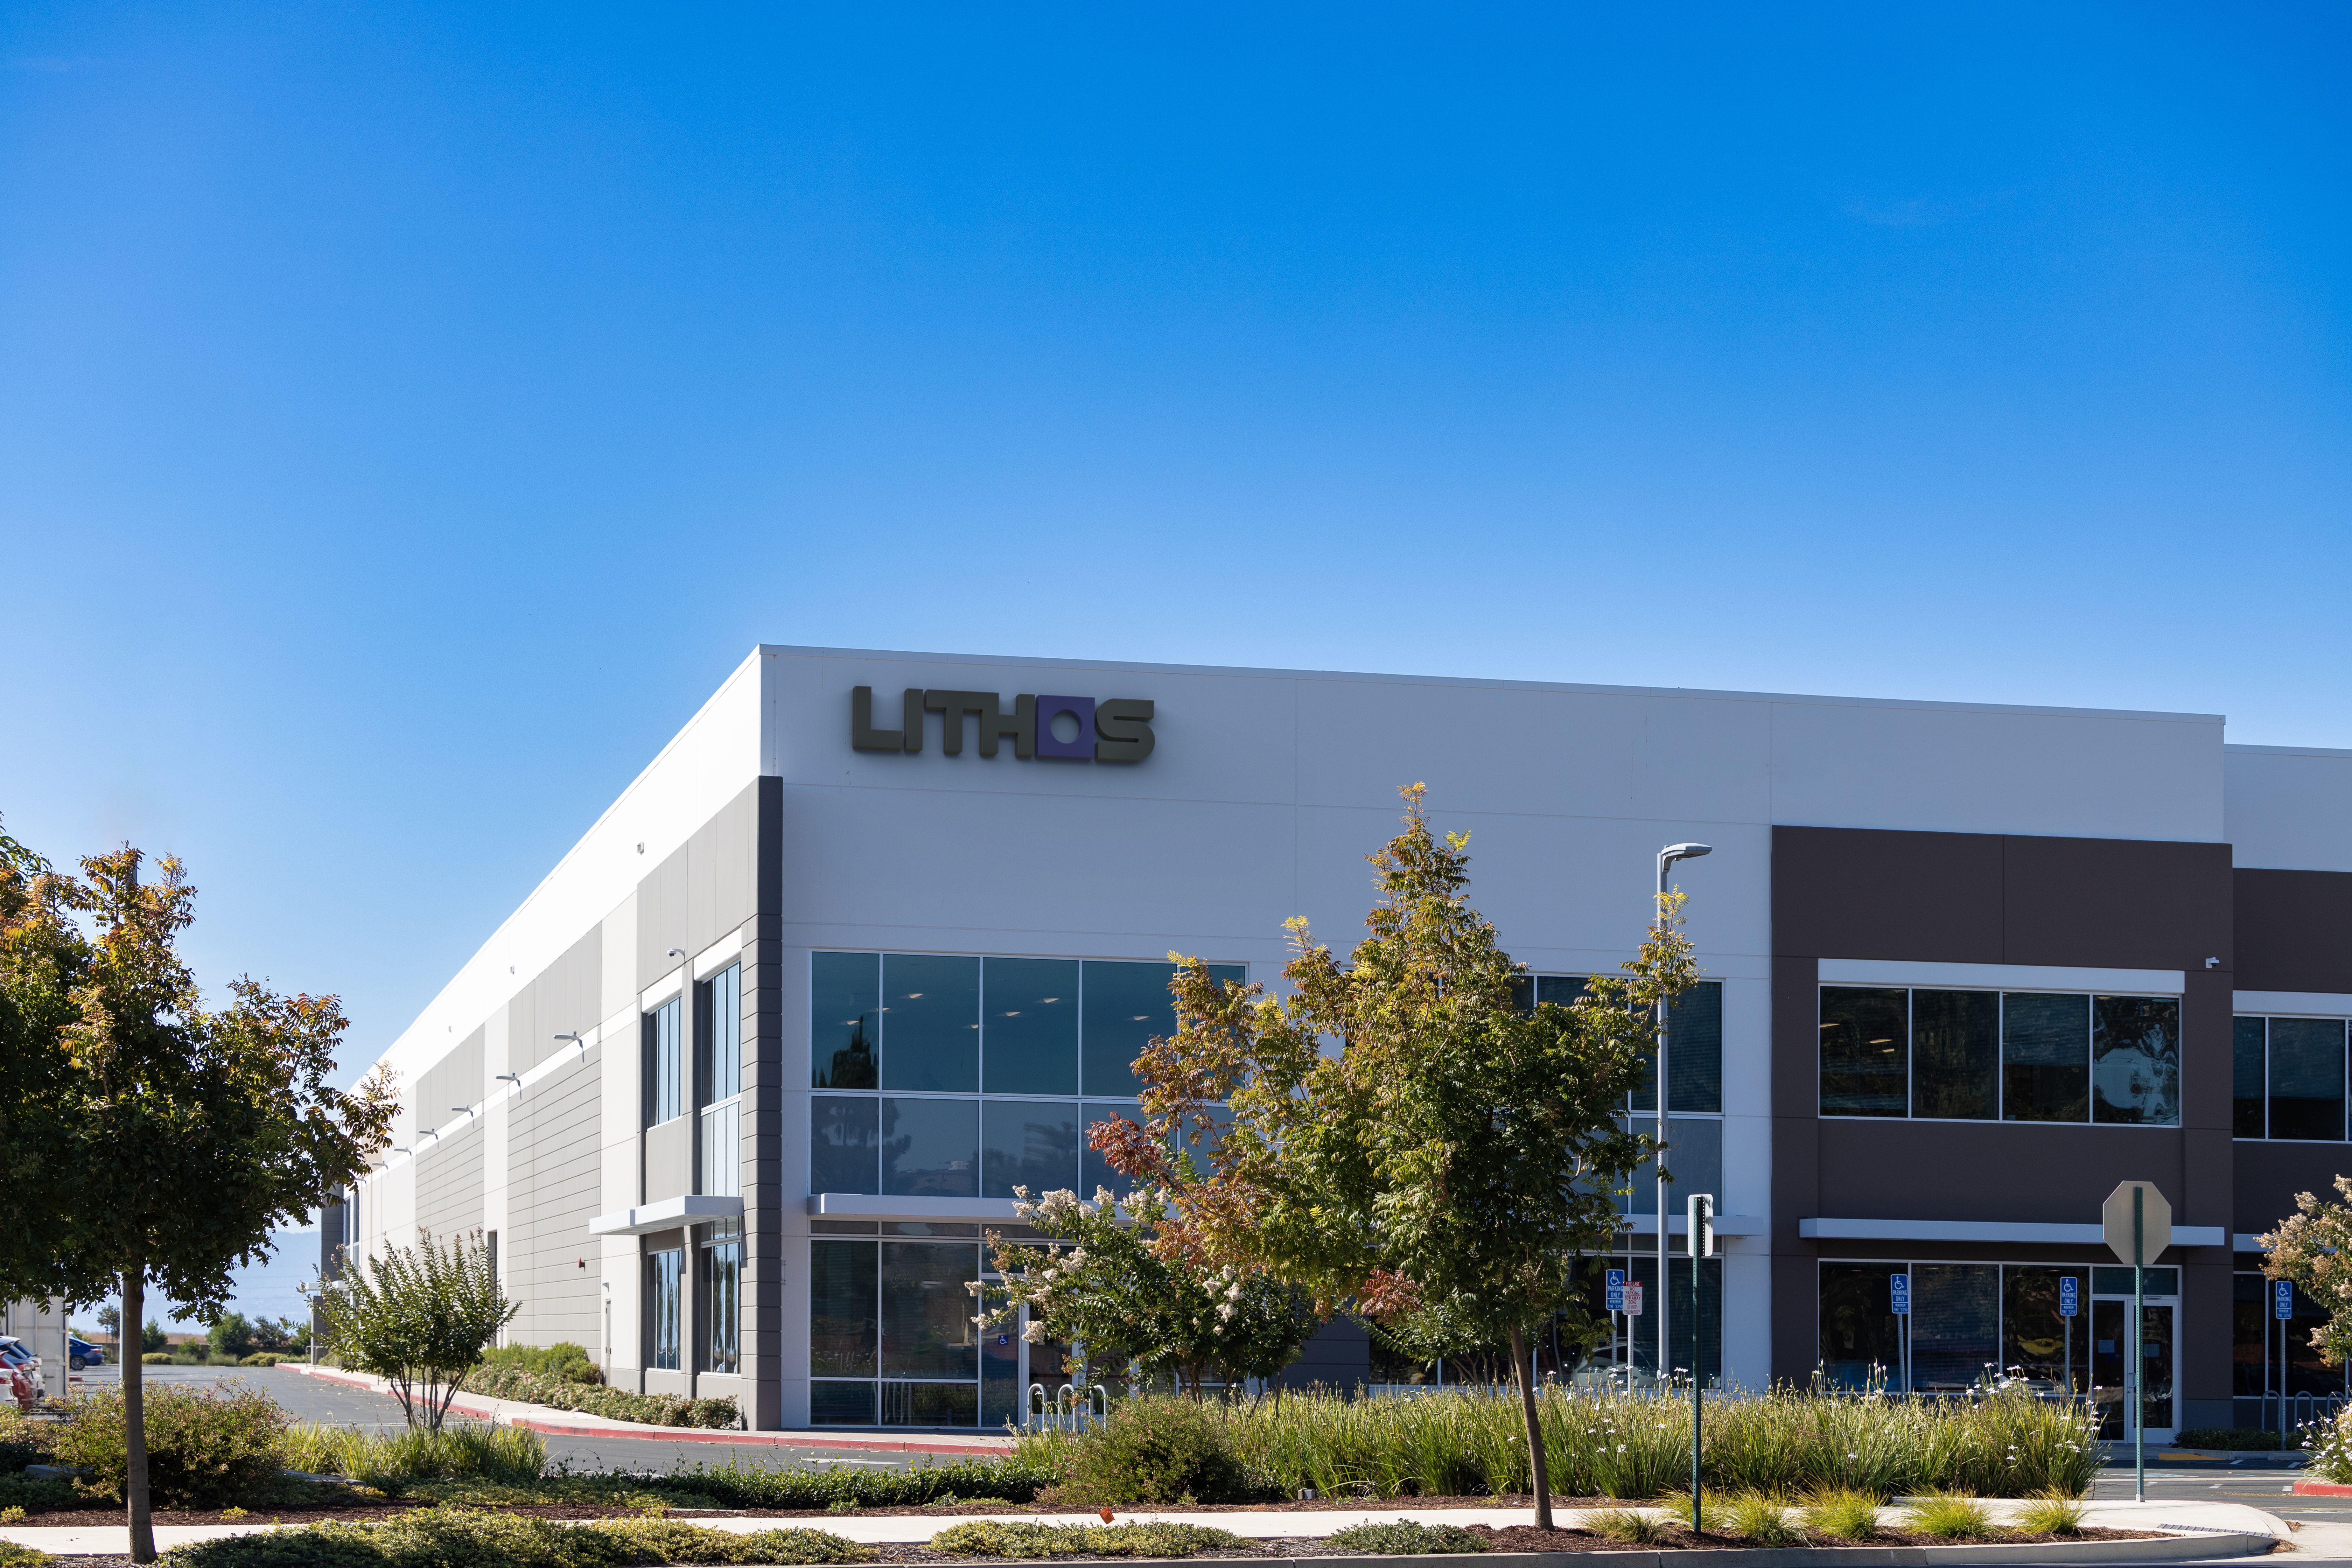 Lithos Opens New Battery System Manufacturing Facility in California